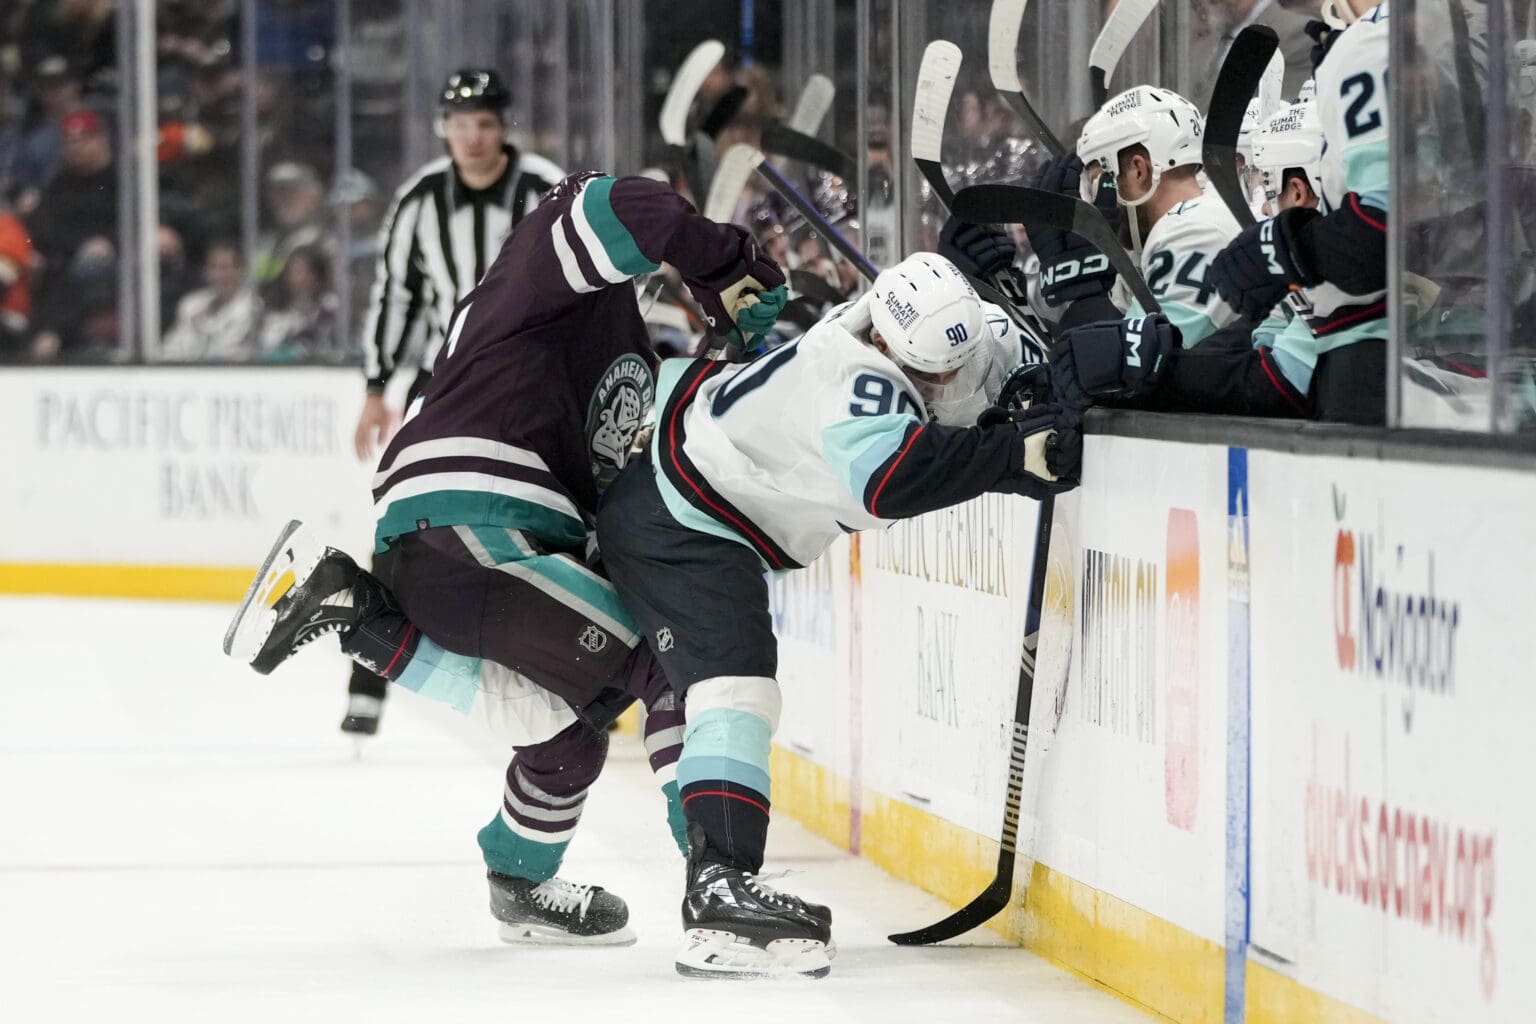 Seattle Kraken left wing Tomas Tatar (90) is shoved by Anaheim Ducks center Trevor Zegras (11) into the glass barrier separating the rink from the sidelines.